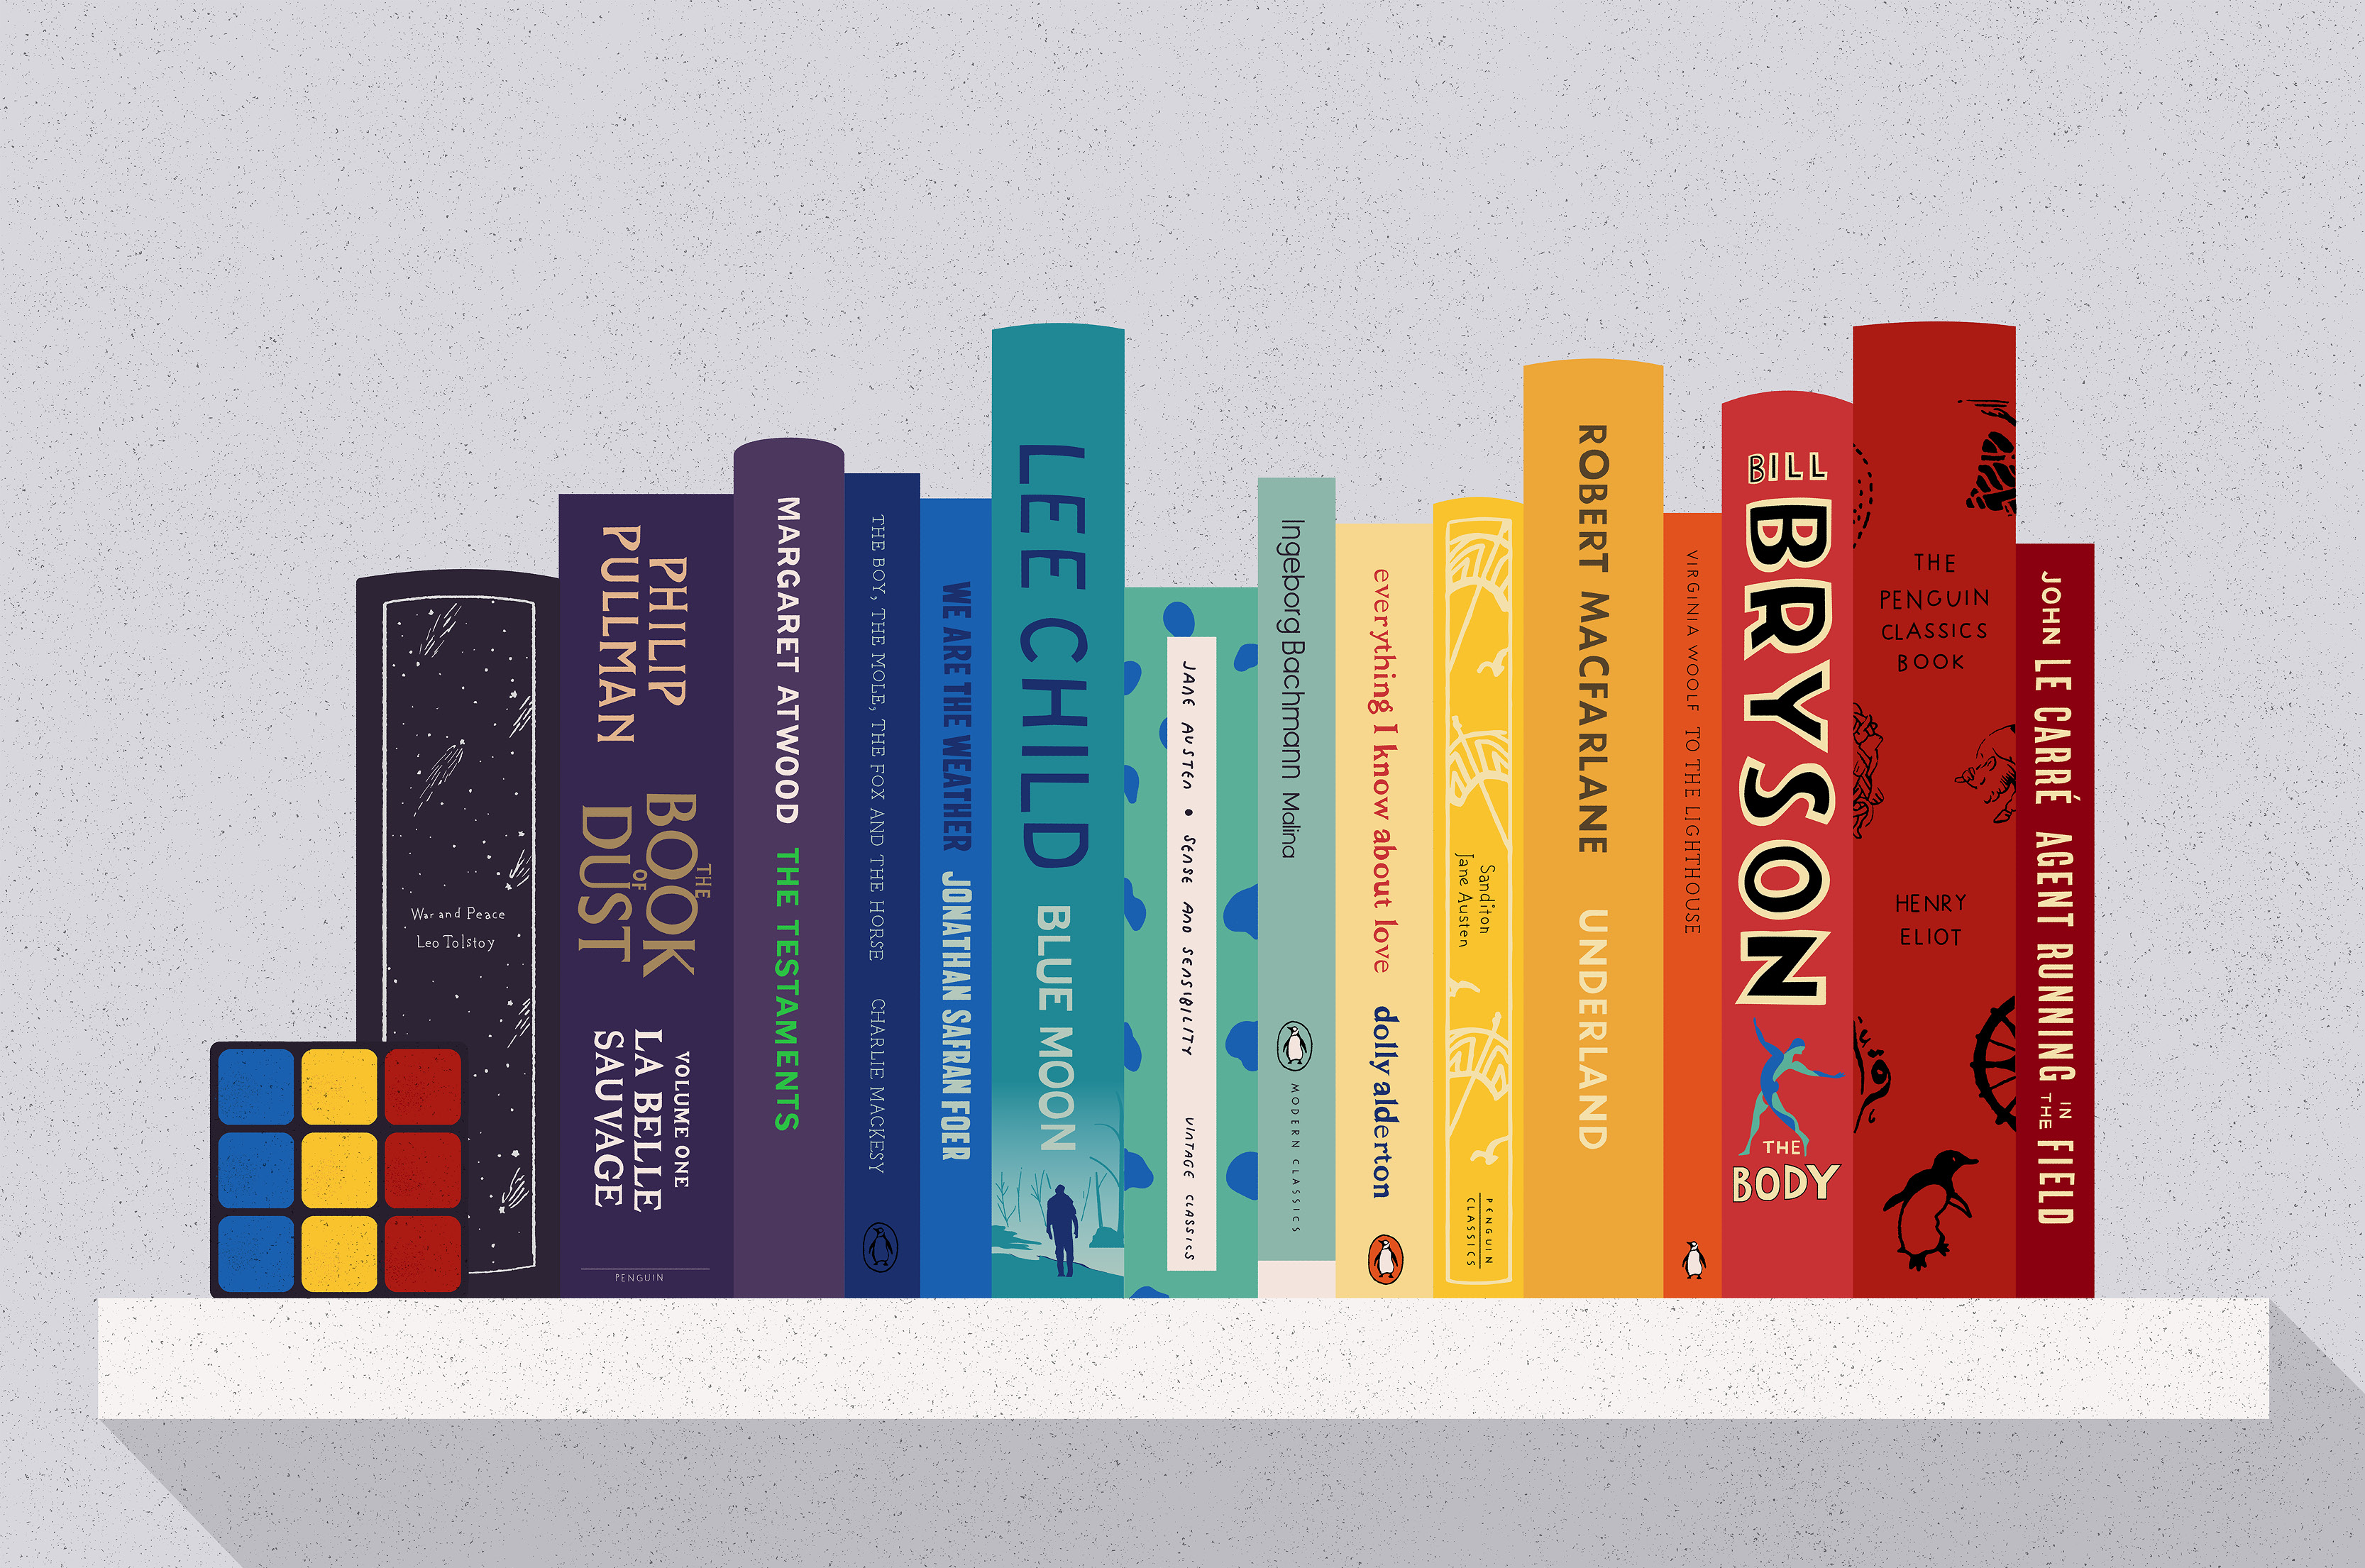 An illustration of a colour-coded bookshelf.